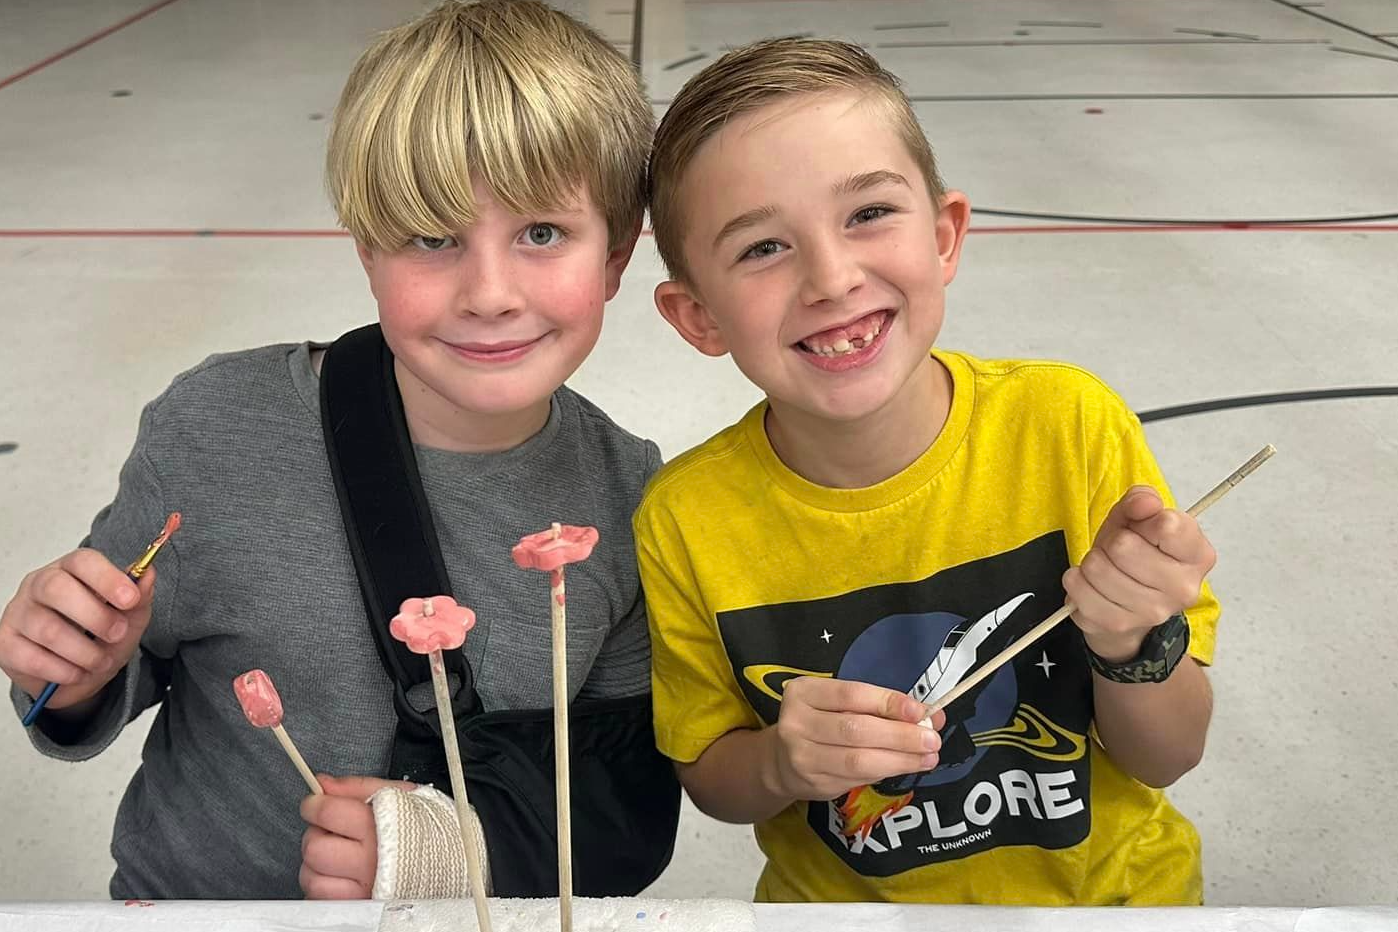 Two young boys smile while holding paintbrushes.